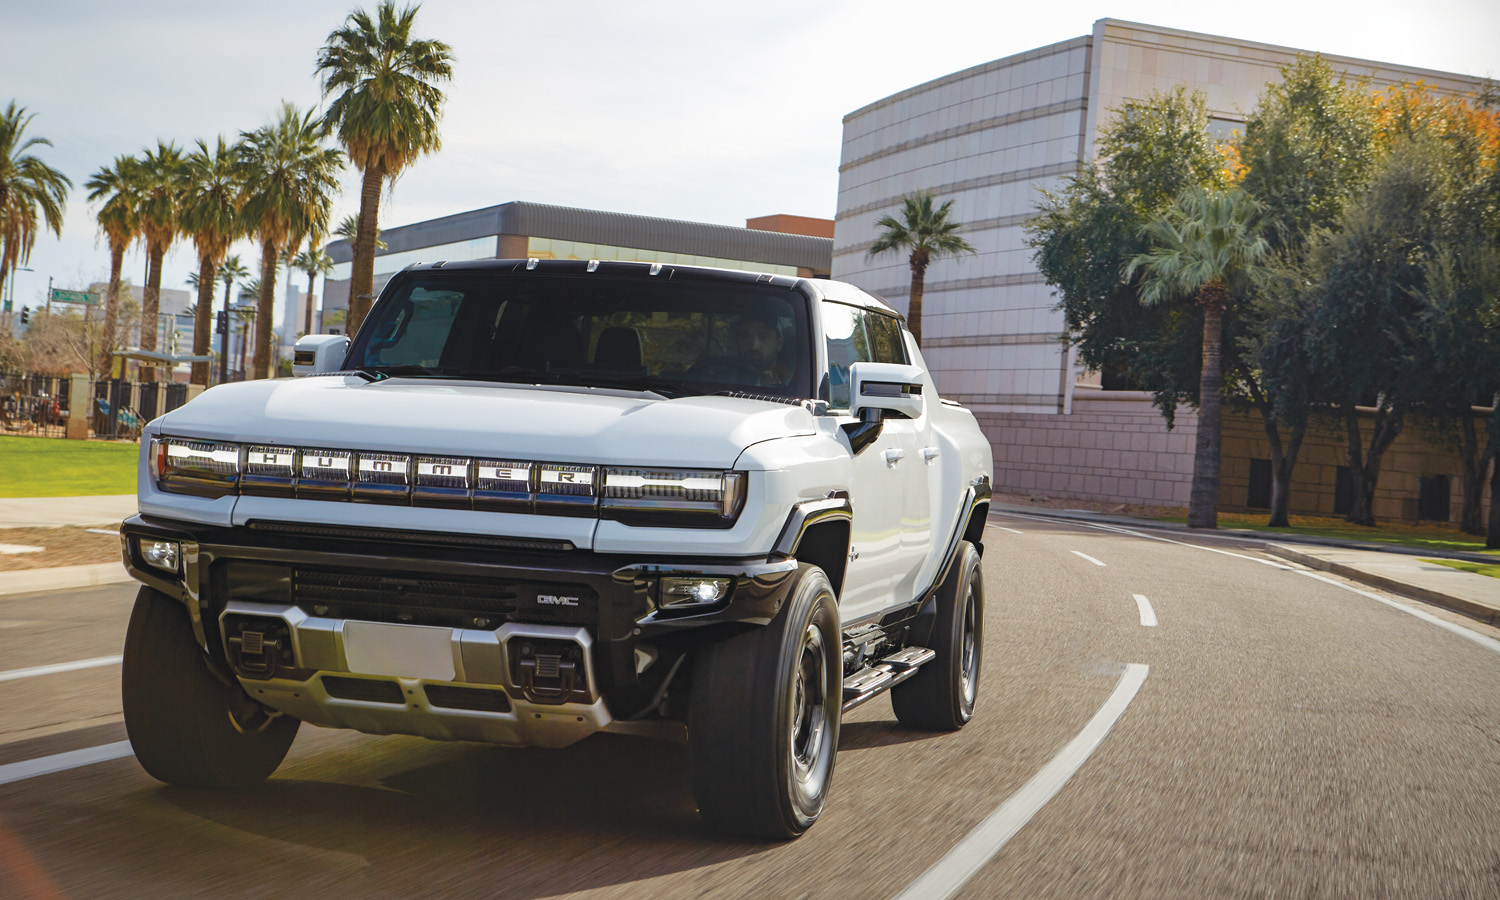 The Hummer EV is a technological powerhouse (over 1,000 horsepower with goodies galore).